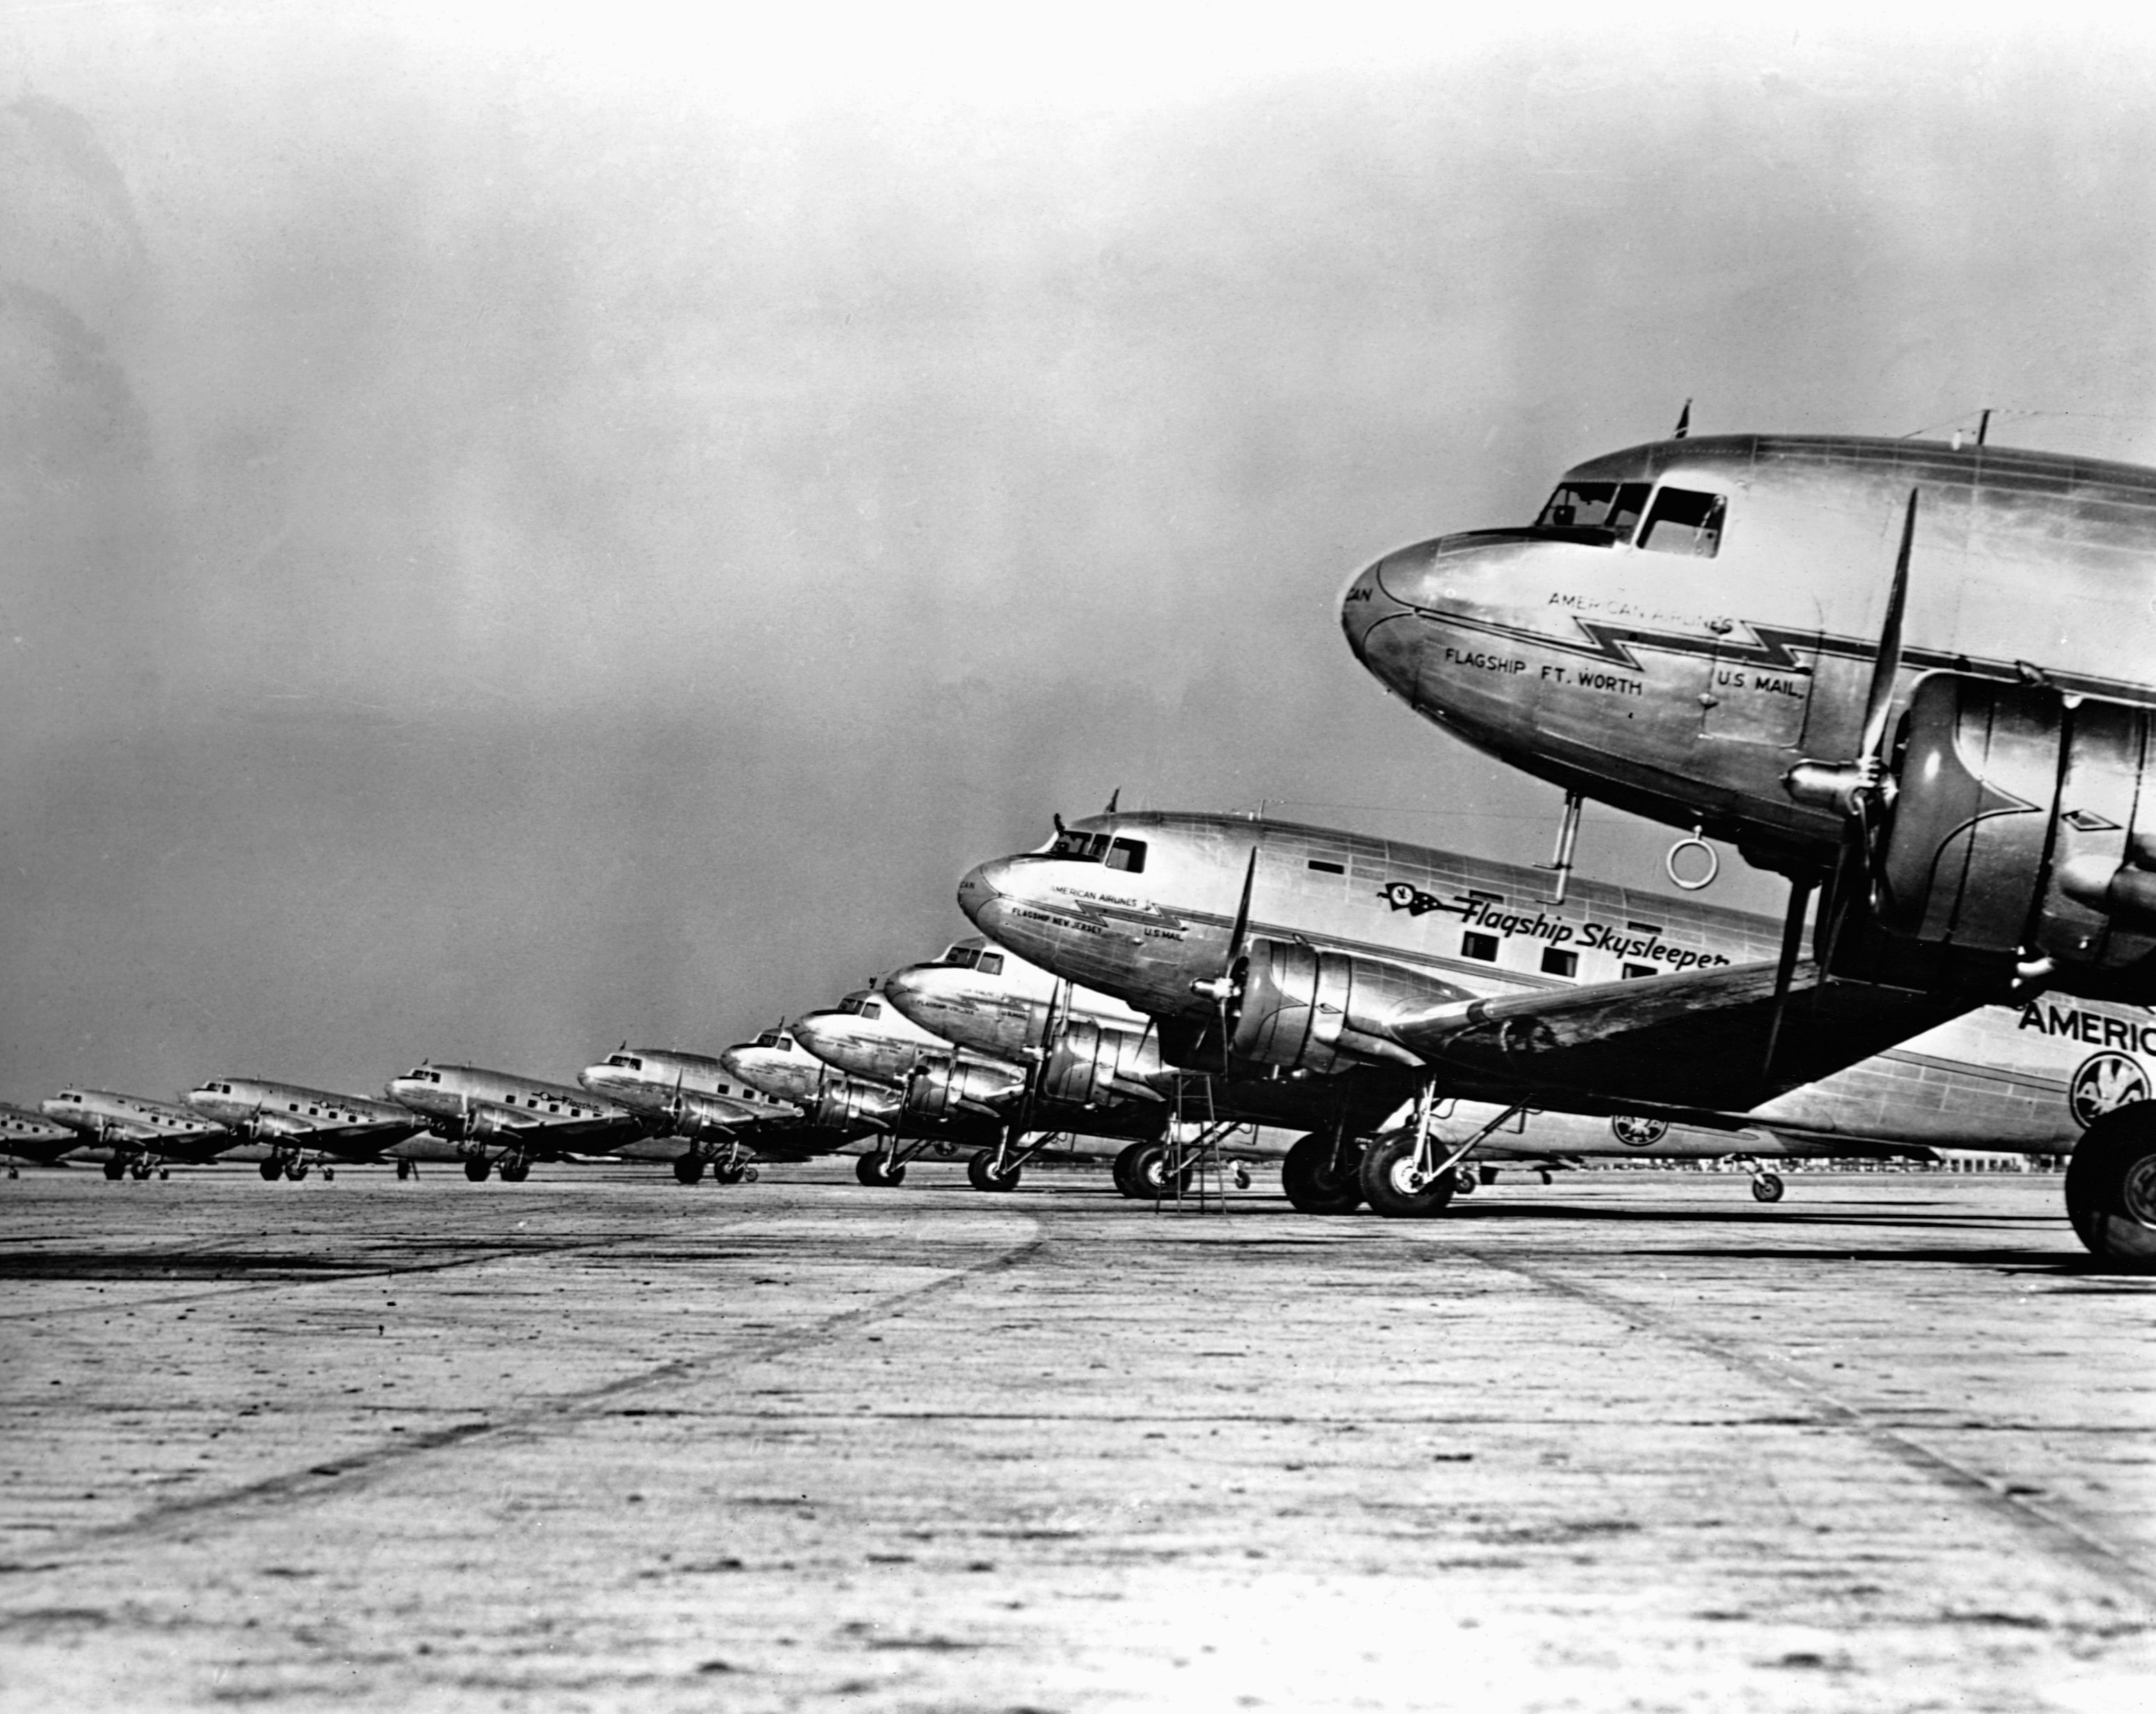 Dc-3s in a row